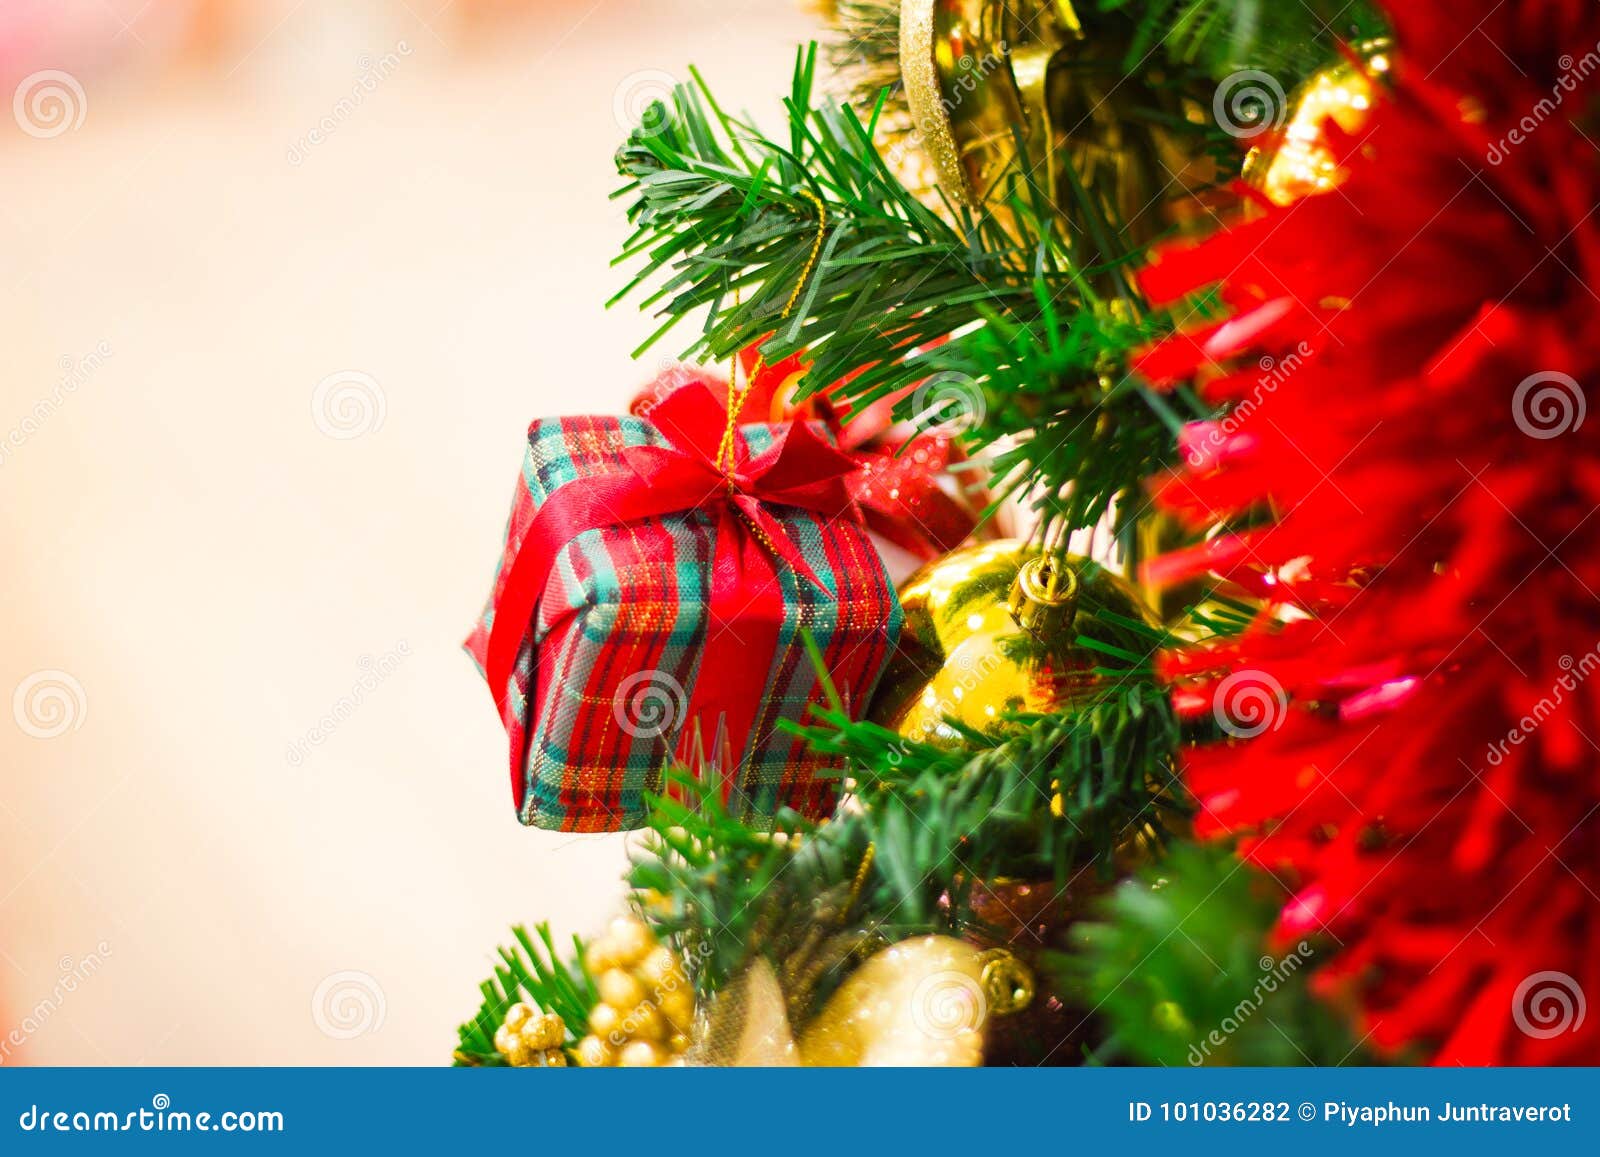 Festive Pine White - Christmas Decorative with Gift Box on Christmas ...